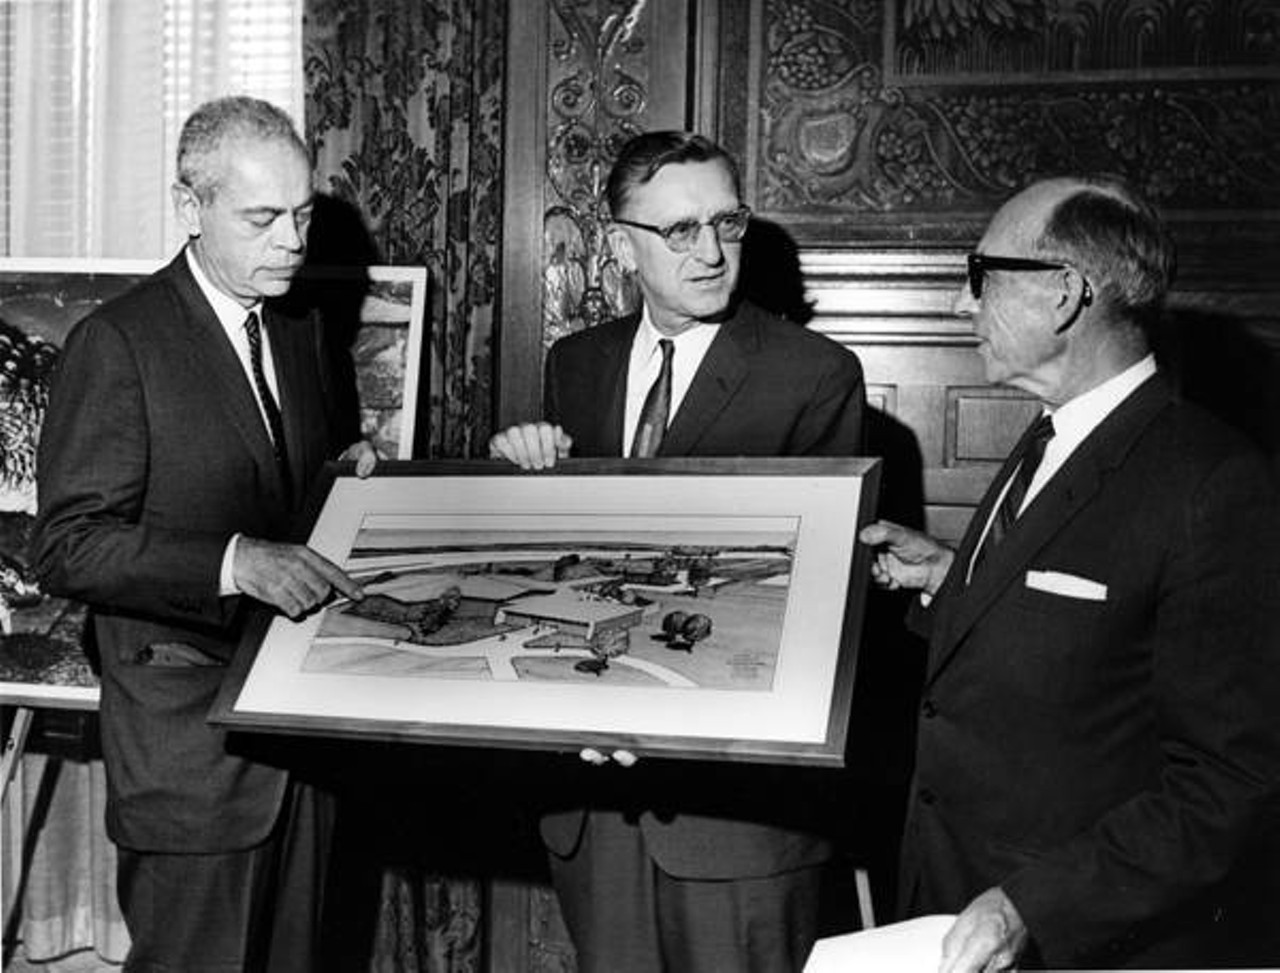 City officials hold architect's rendering of Cleveland Aquarium, 1965